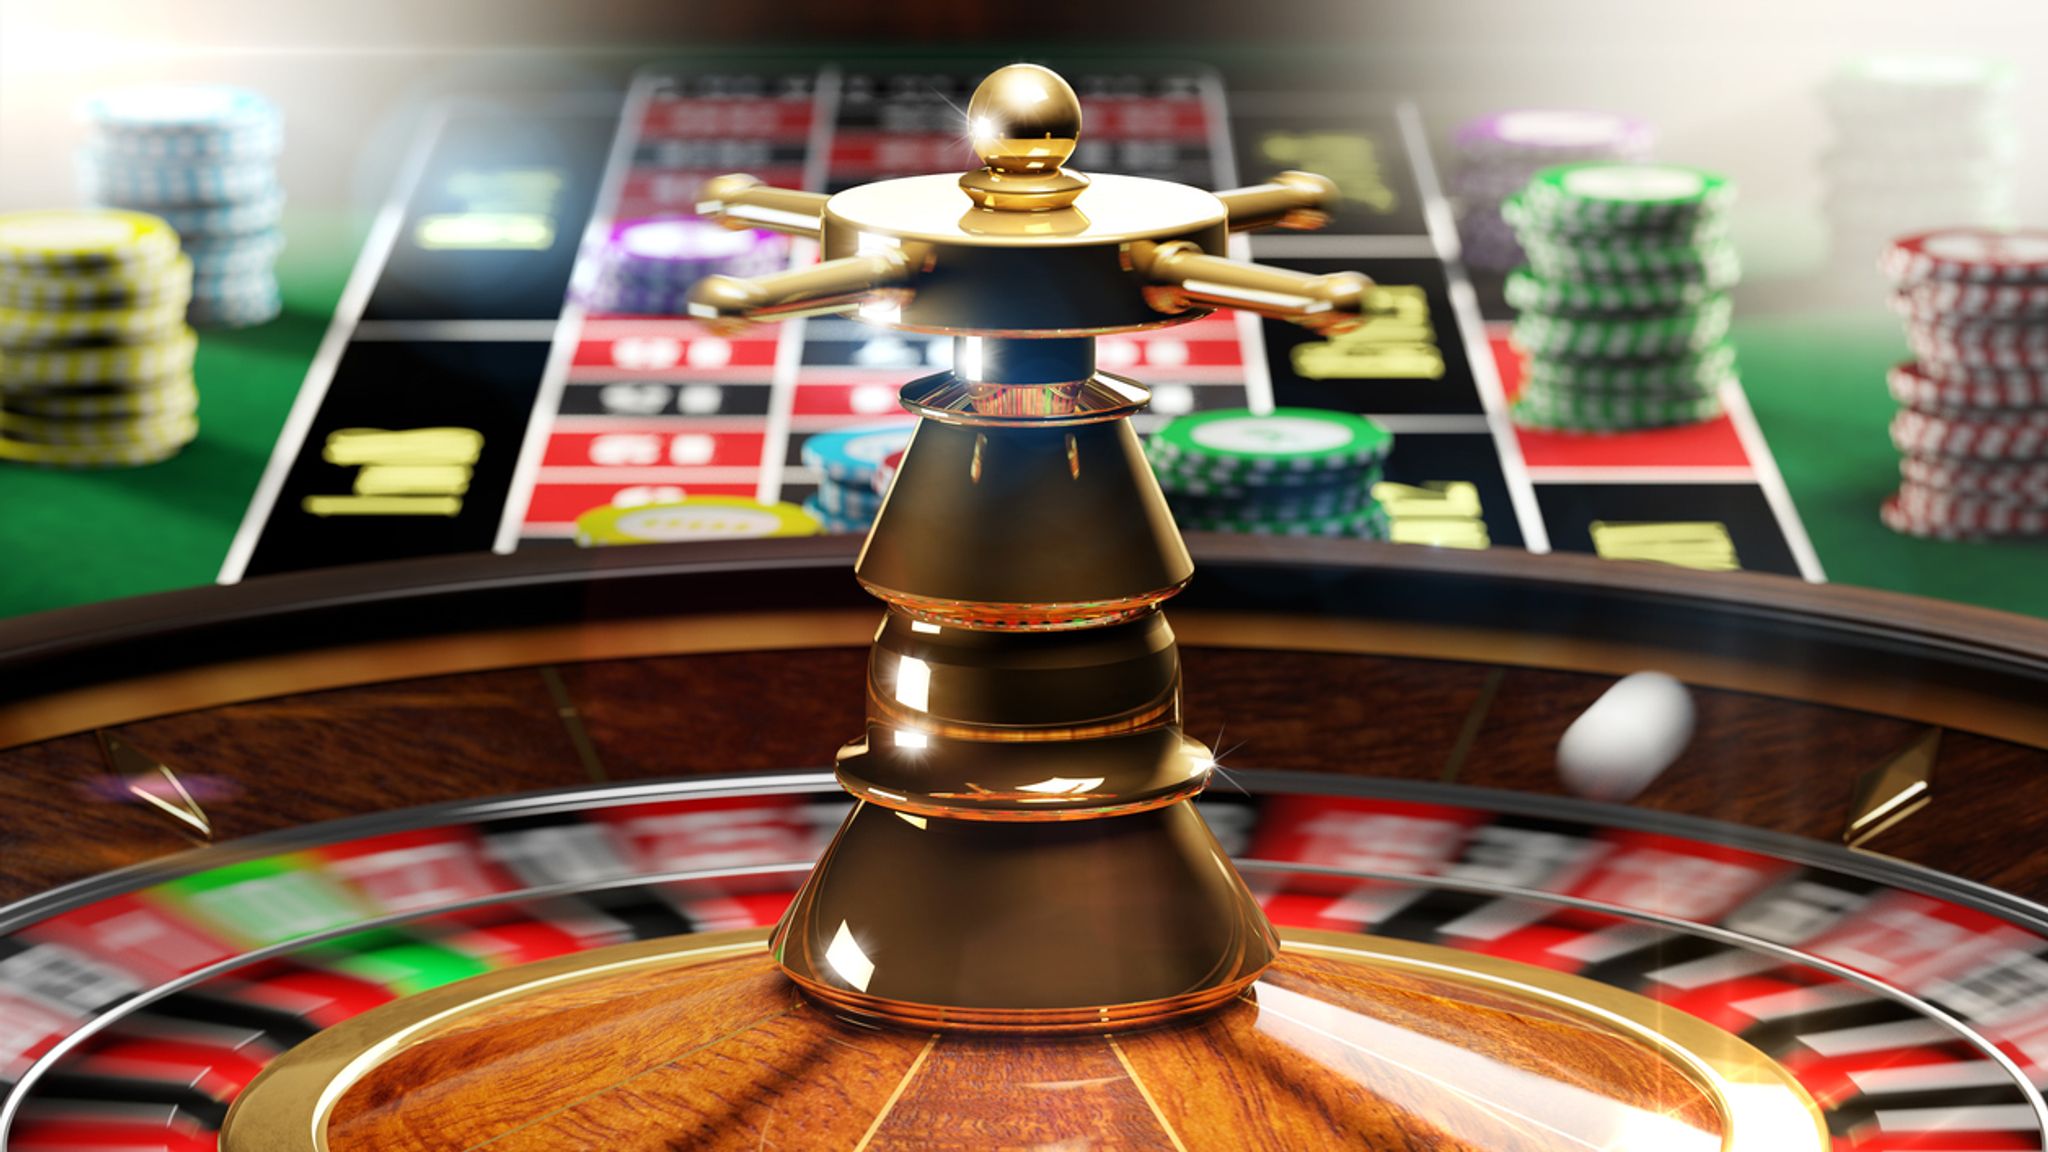 William Hill gambling company Mr Green fined £3m | Business News | Sky News